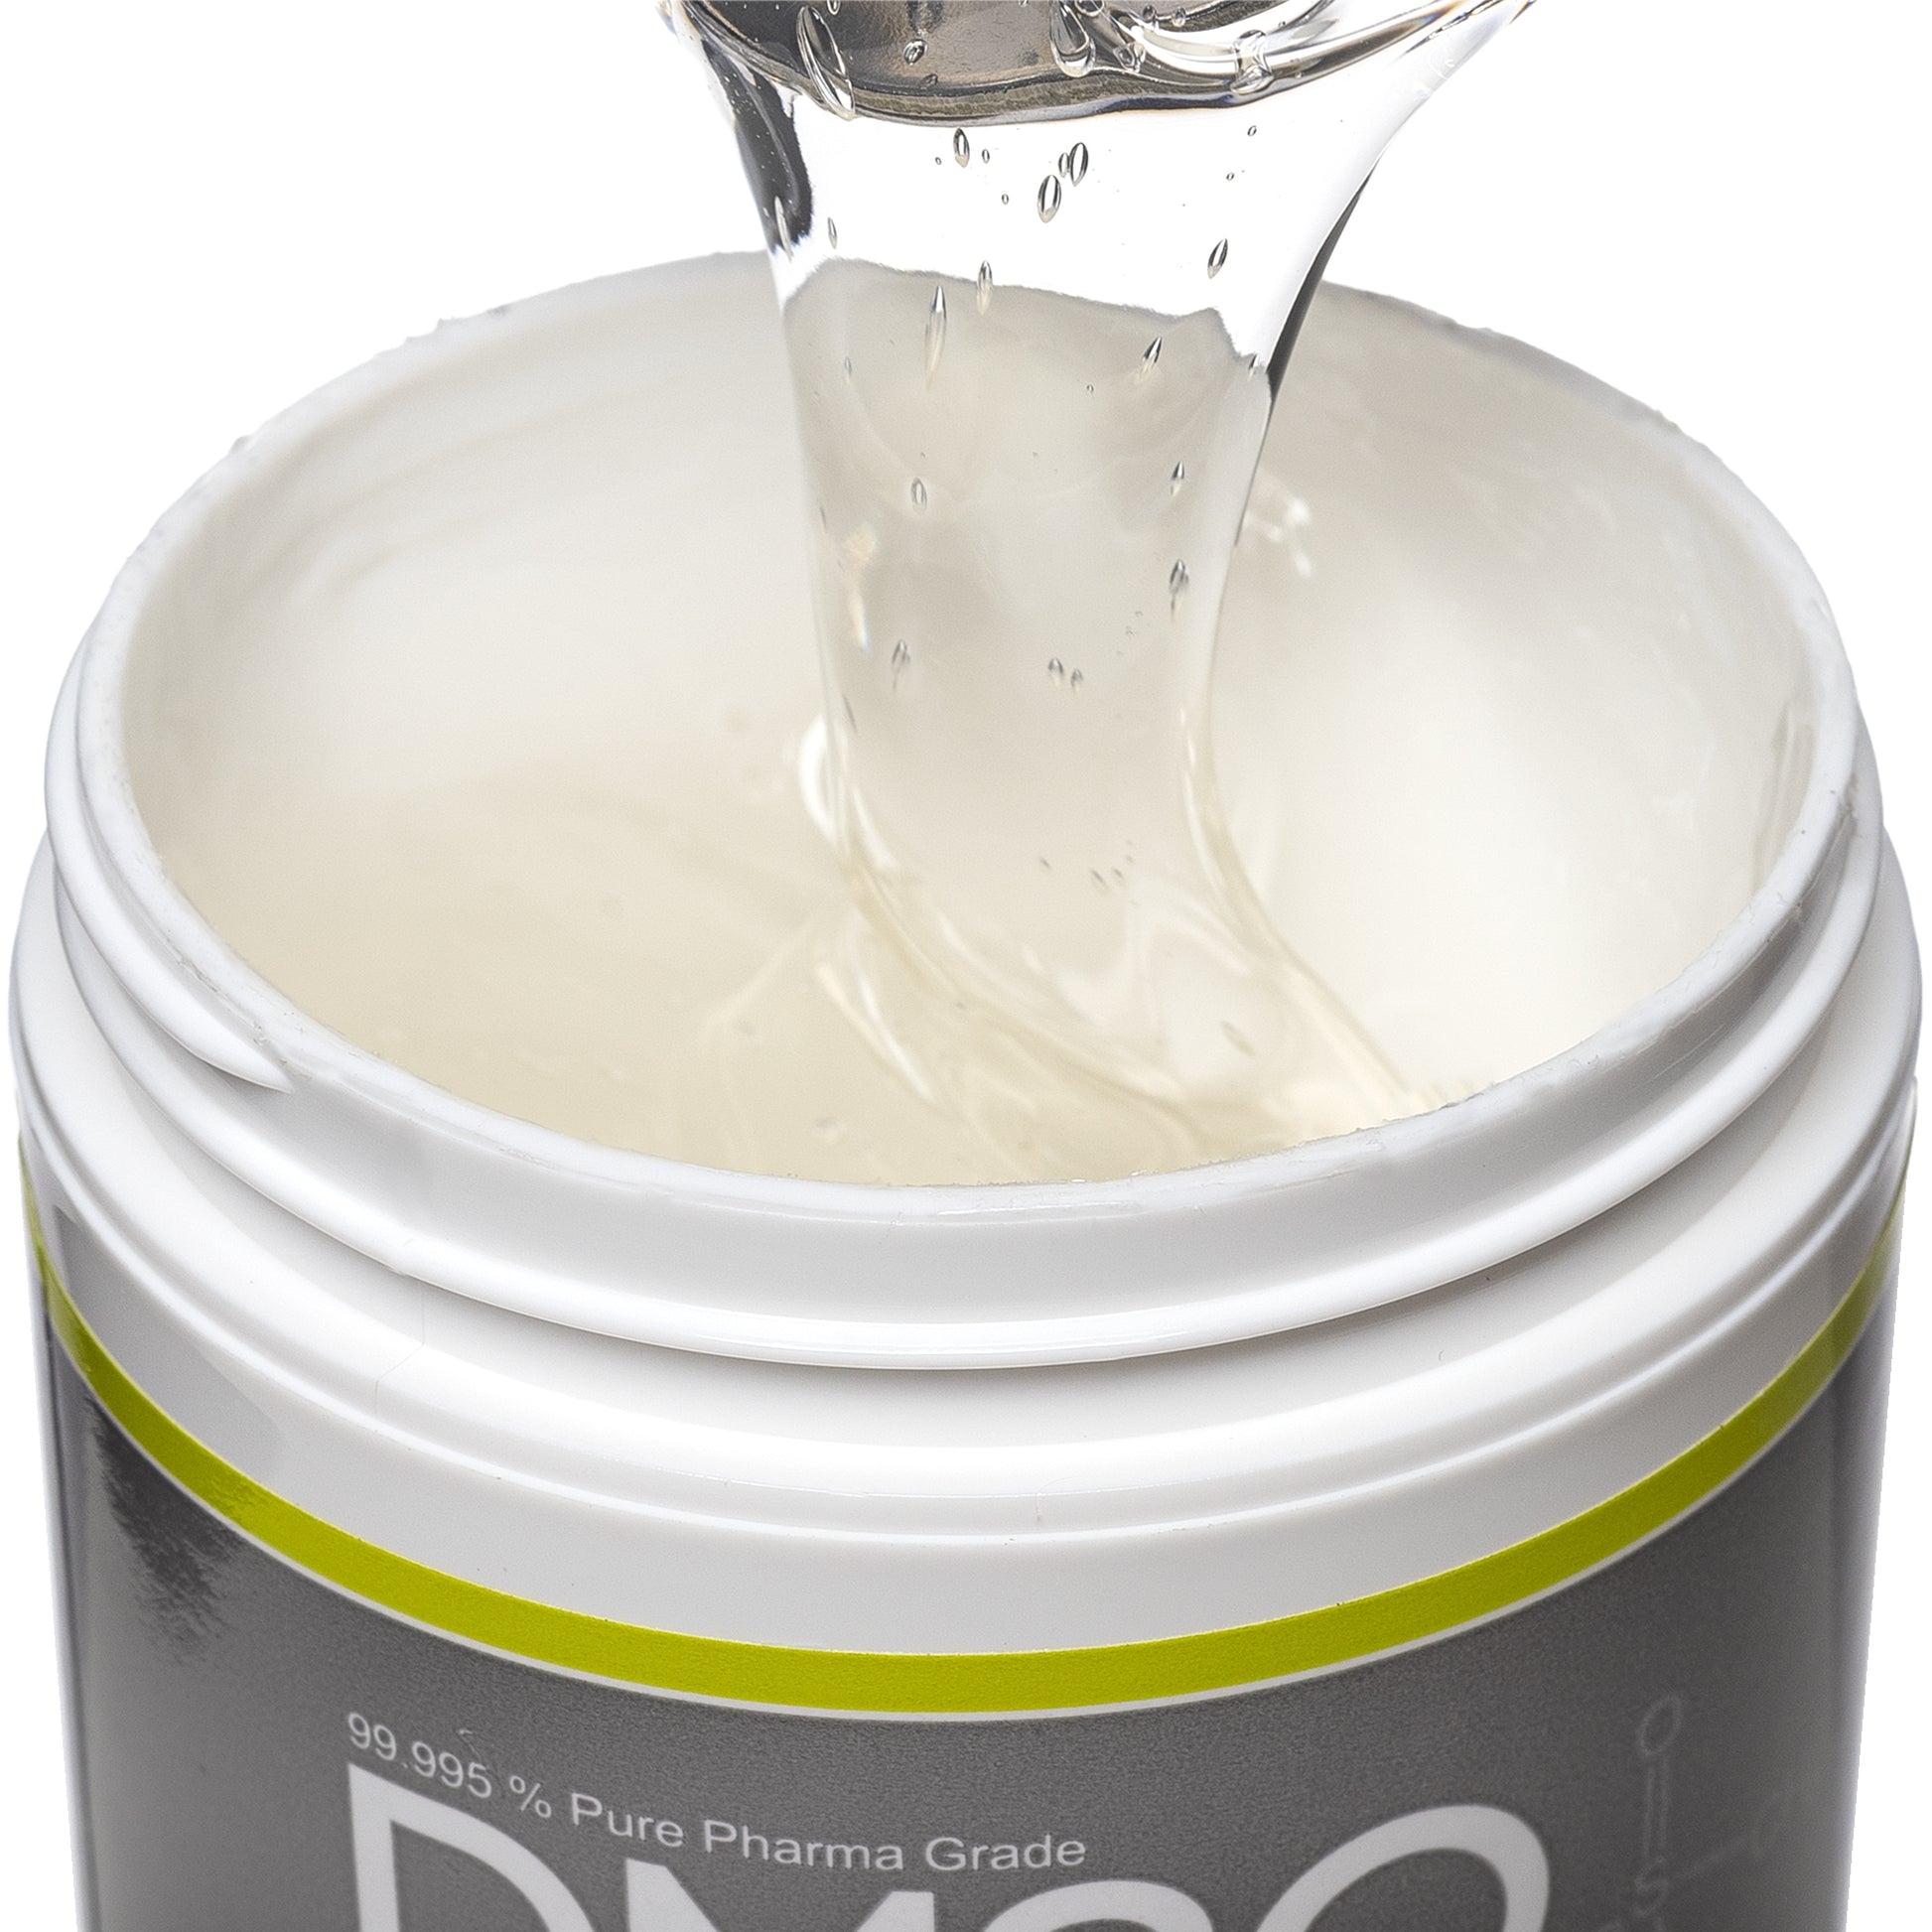 DMSO-gel-99.995-pure-dimethyl-sulfoxide-muscle-pain-closeup. Opened view of the 4 oz medi gel jar. Contents revealed is the medi gel product. Product is being scooped upwards with a spoon to show consistency.